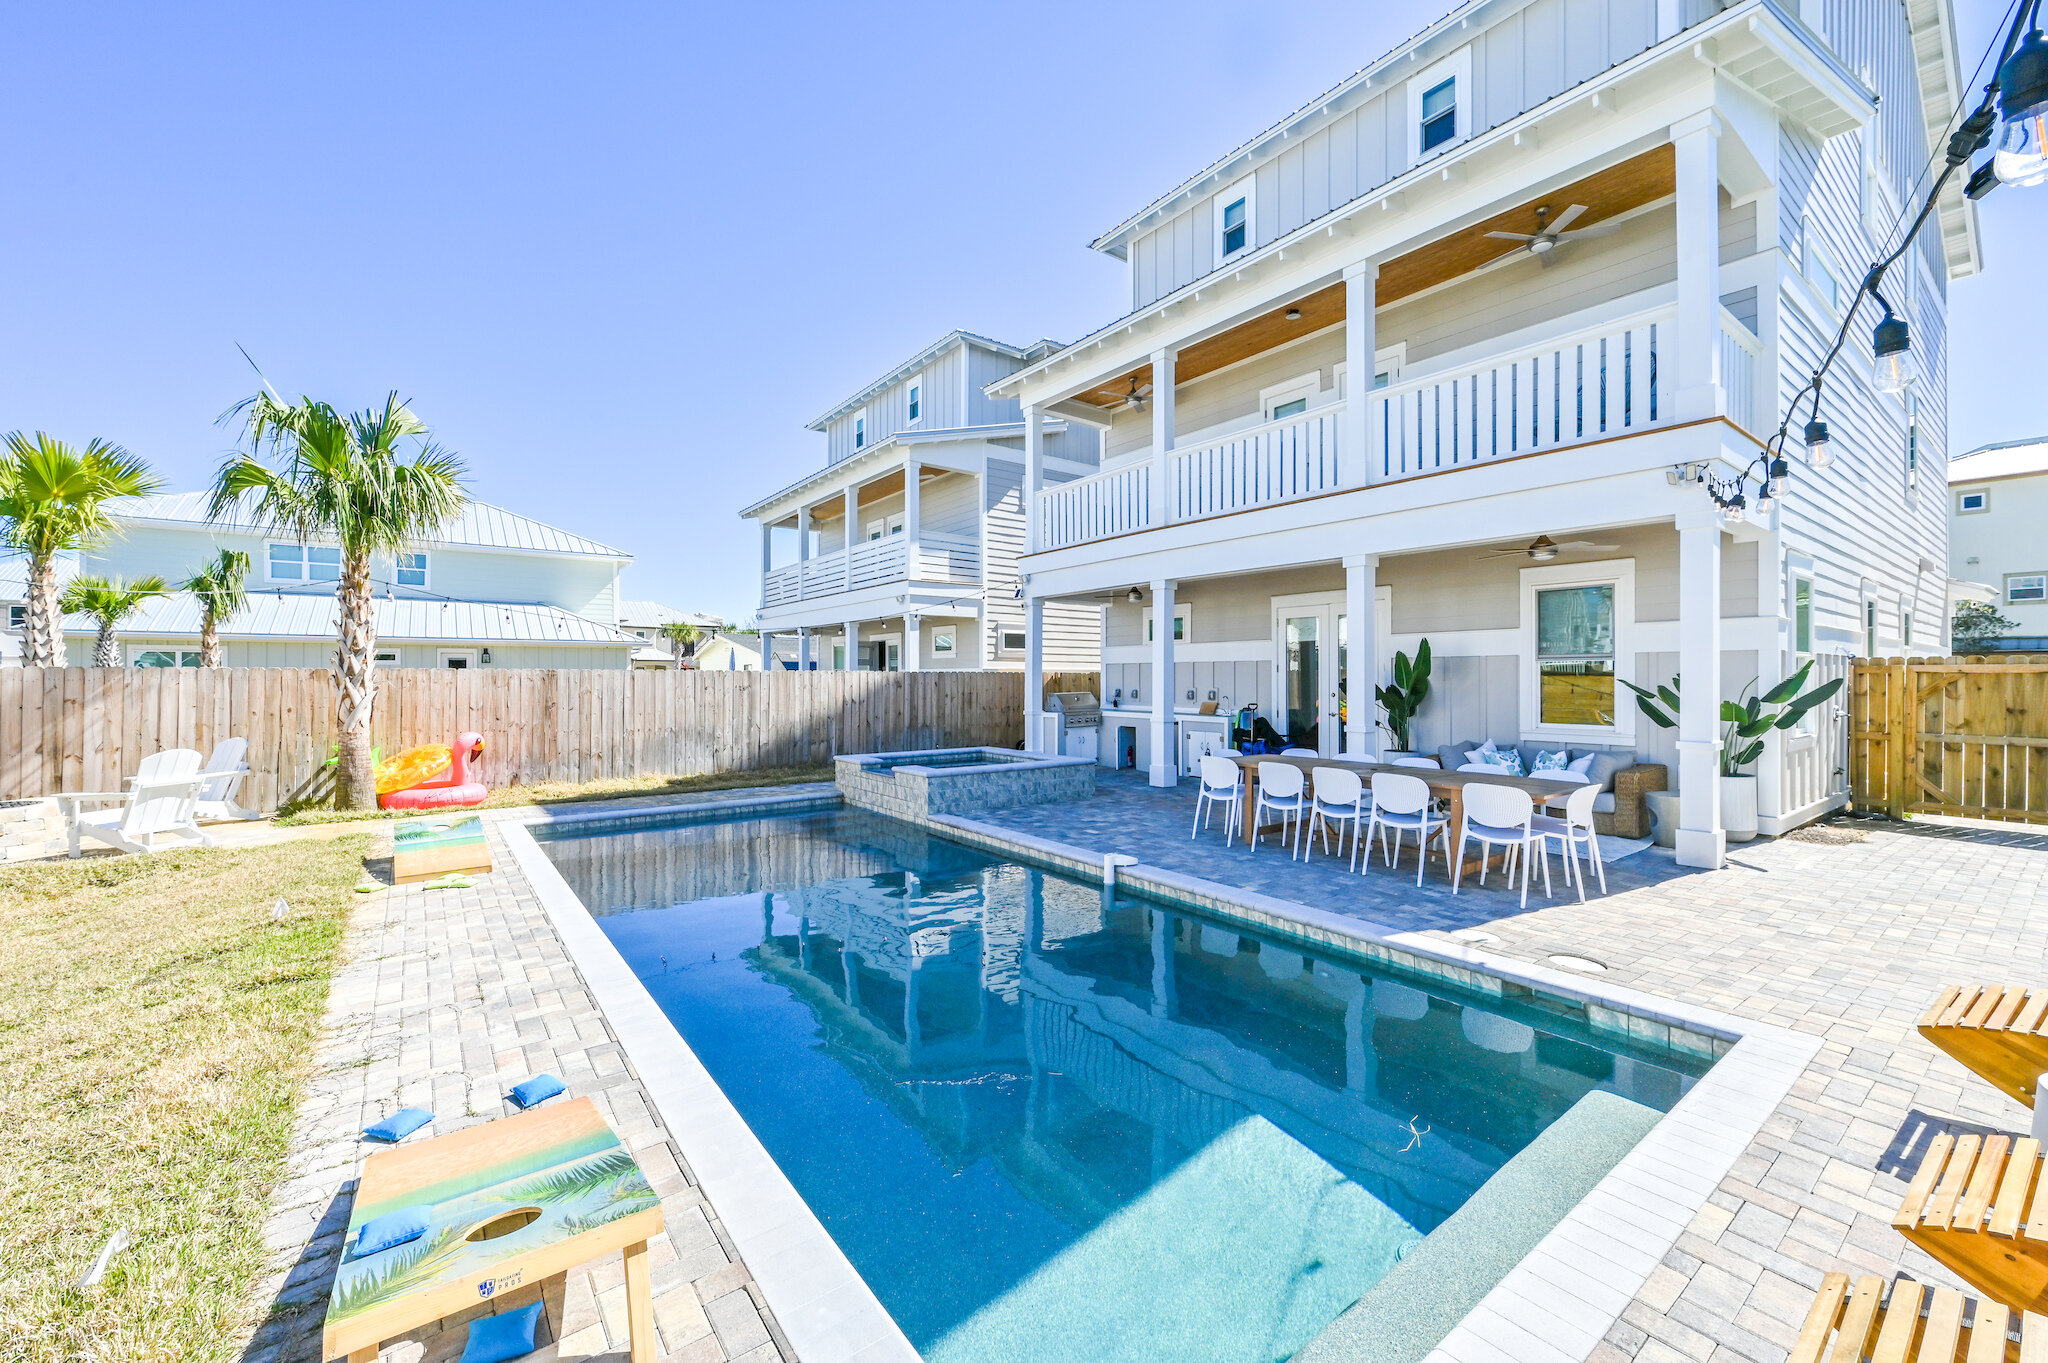 Check out our newest Villa located in #miramarbeach, book now and be the first guests to enjoy it! 
.
.
.
.
#vacationtime #traveladdict #vacations #travelgoals #vacationhome #vacationmode #airbnbhost #beach #miramar #miramarfl #miramarbeach #destin #